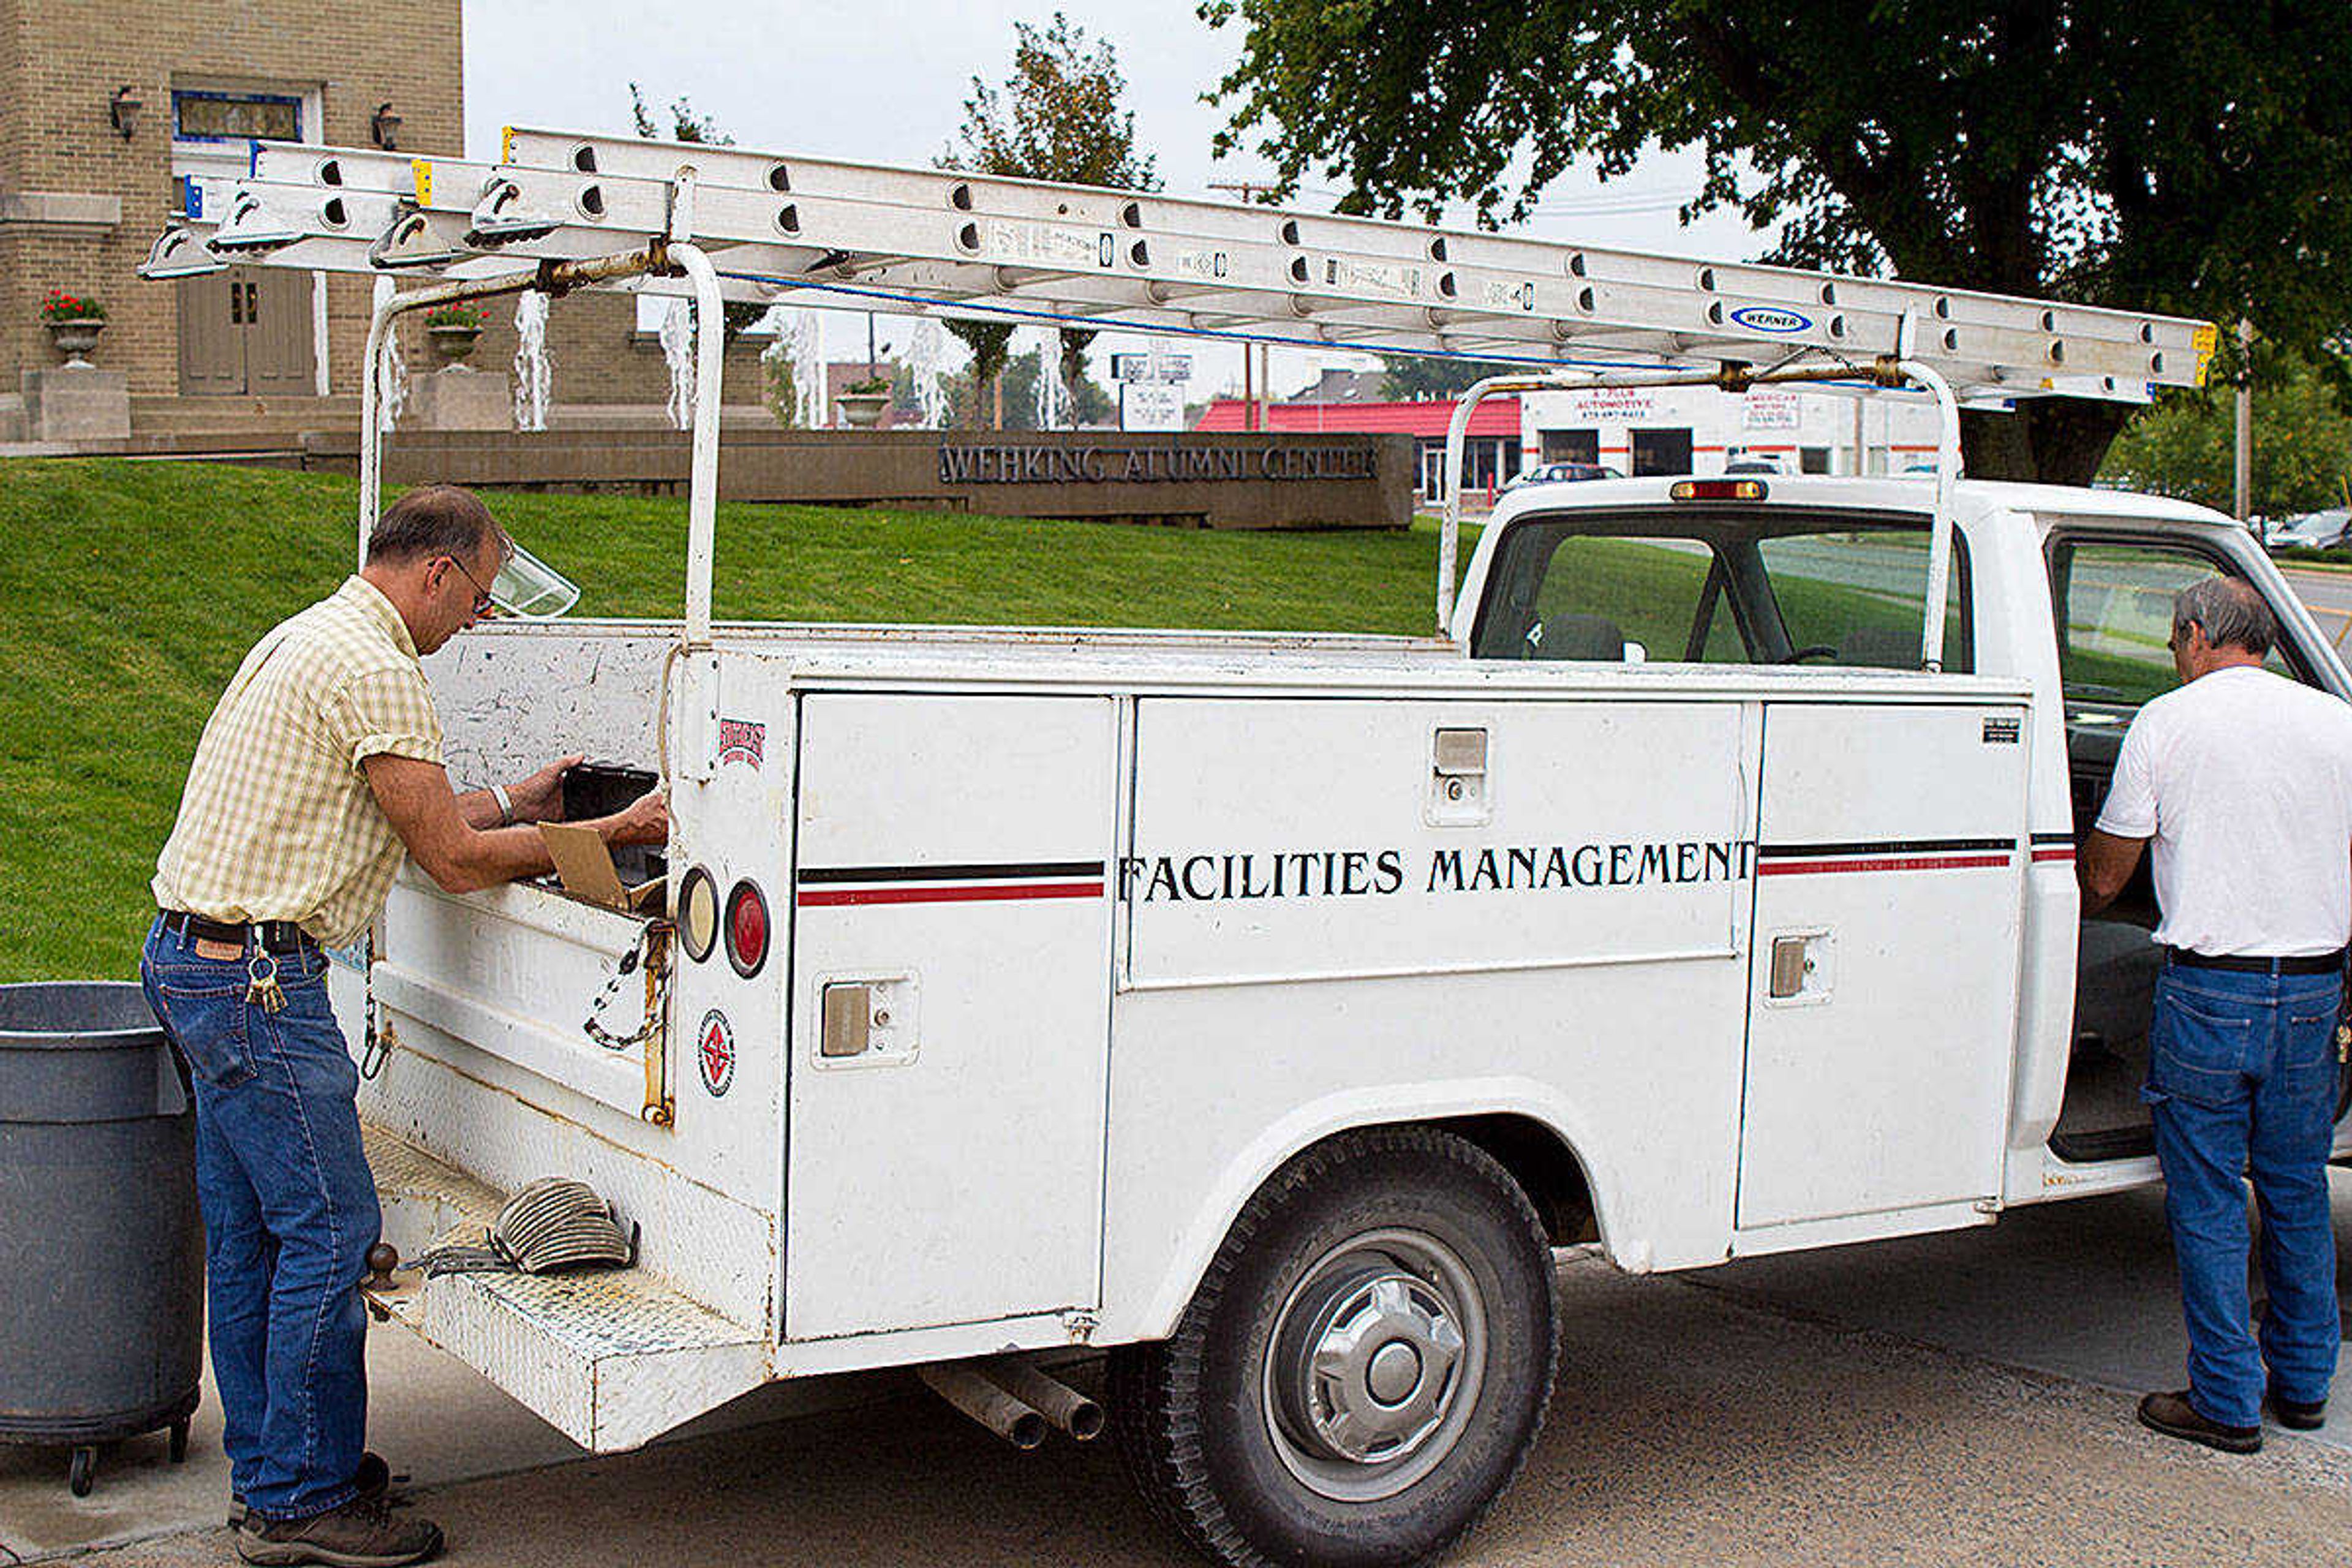 Facilities Management employees pack up their truck after doing maintenance at the Alumni Center. Photo by Paul Stokes